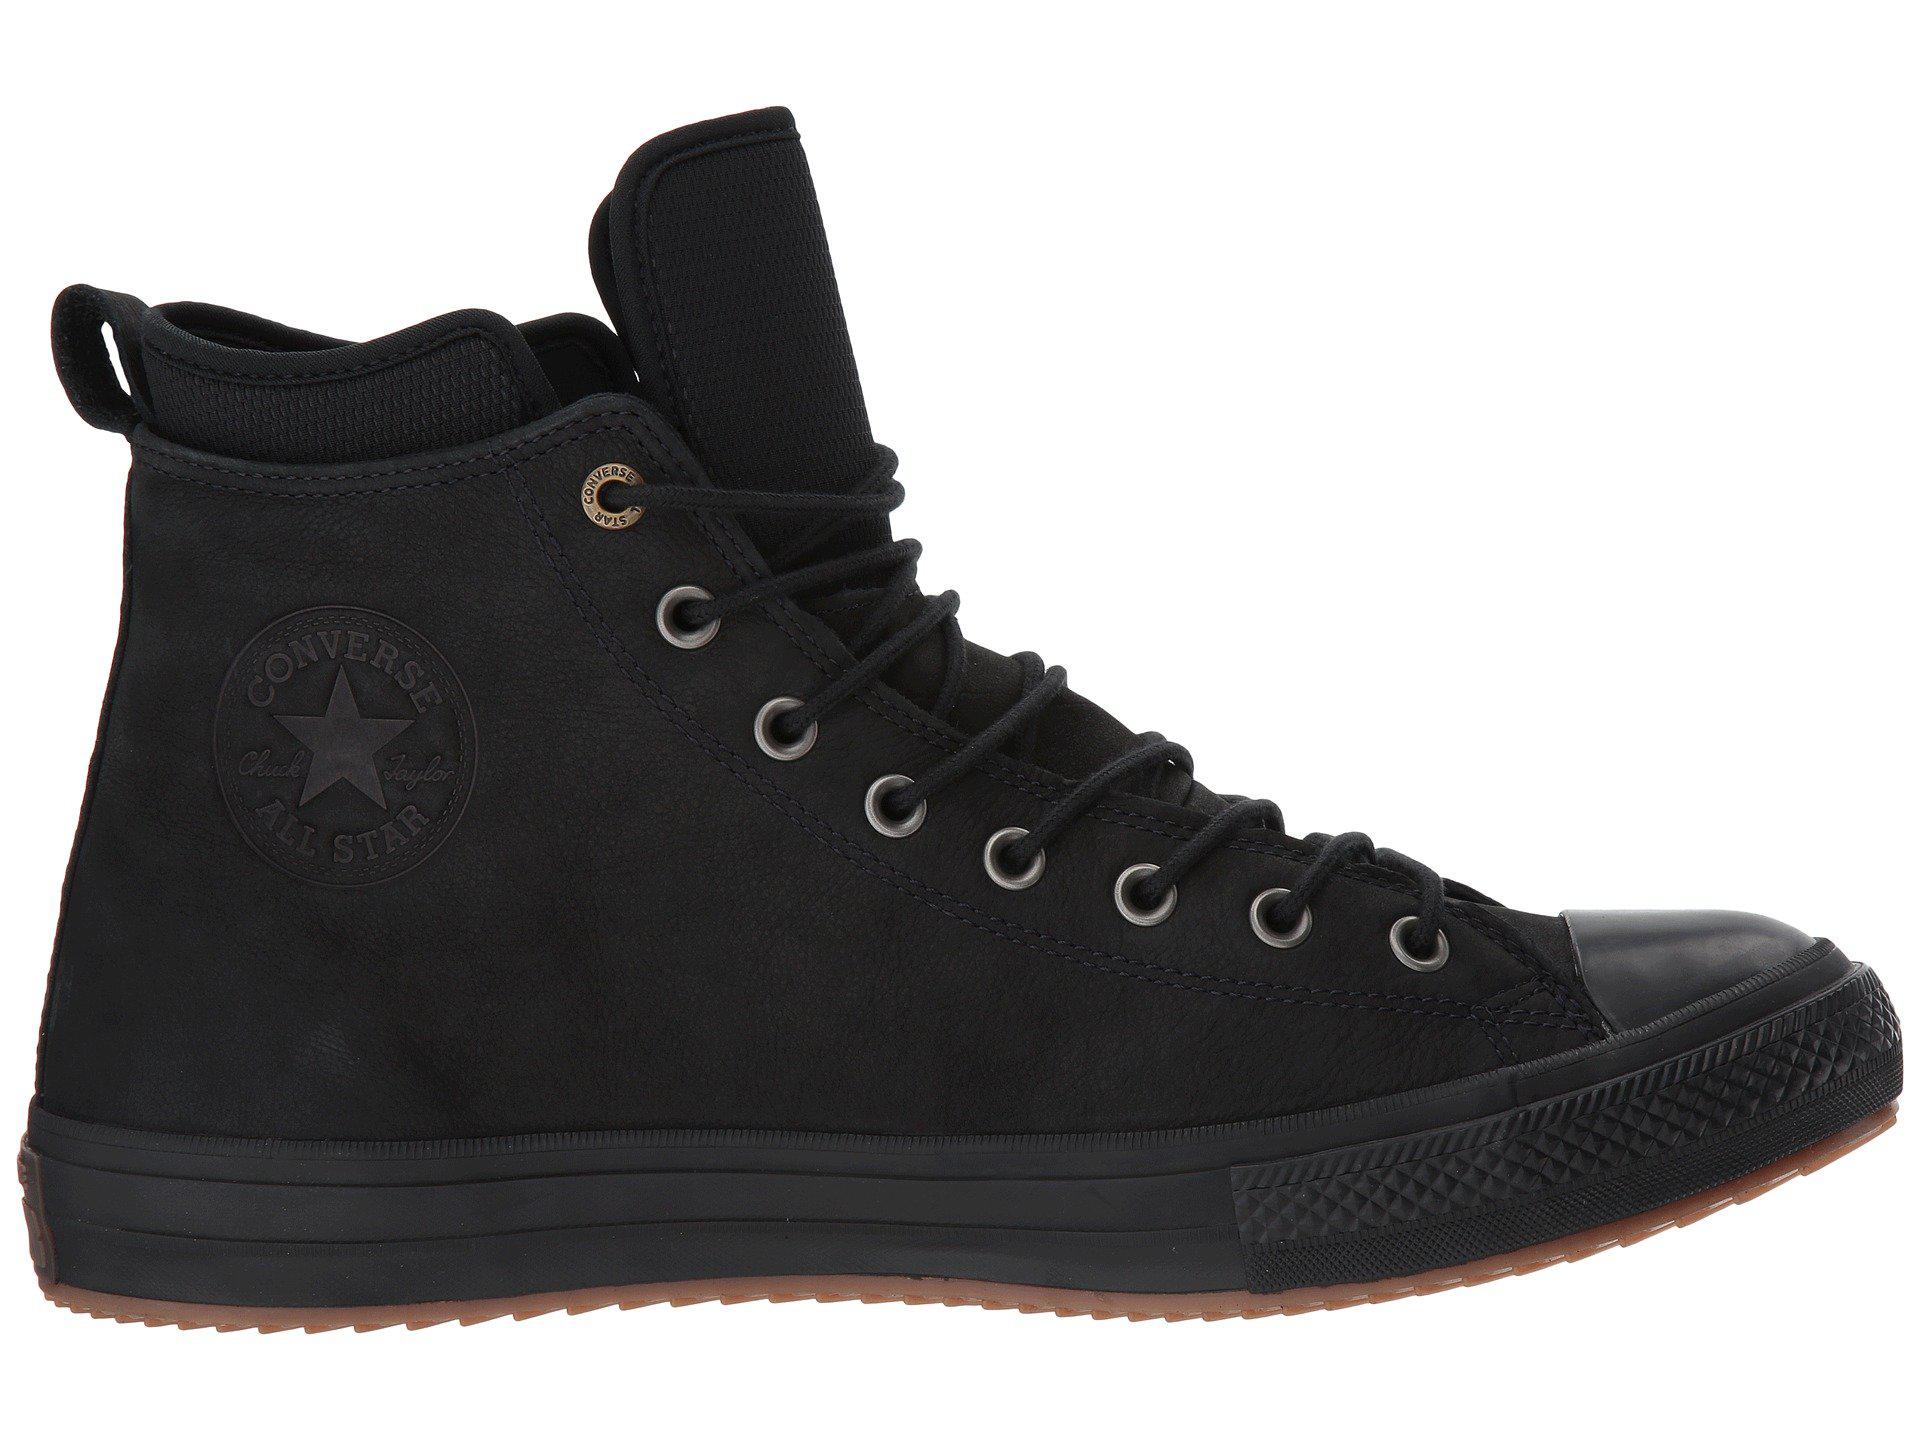 converse chuck taylor all star waterproof nubuck boot unisex leather boot